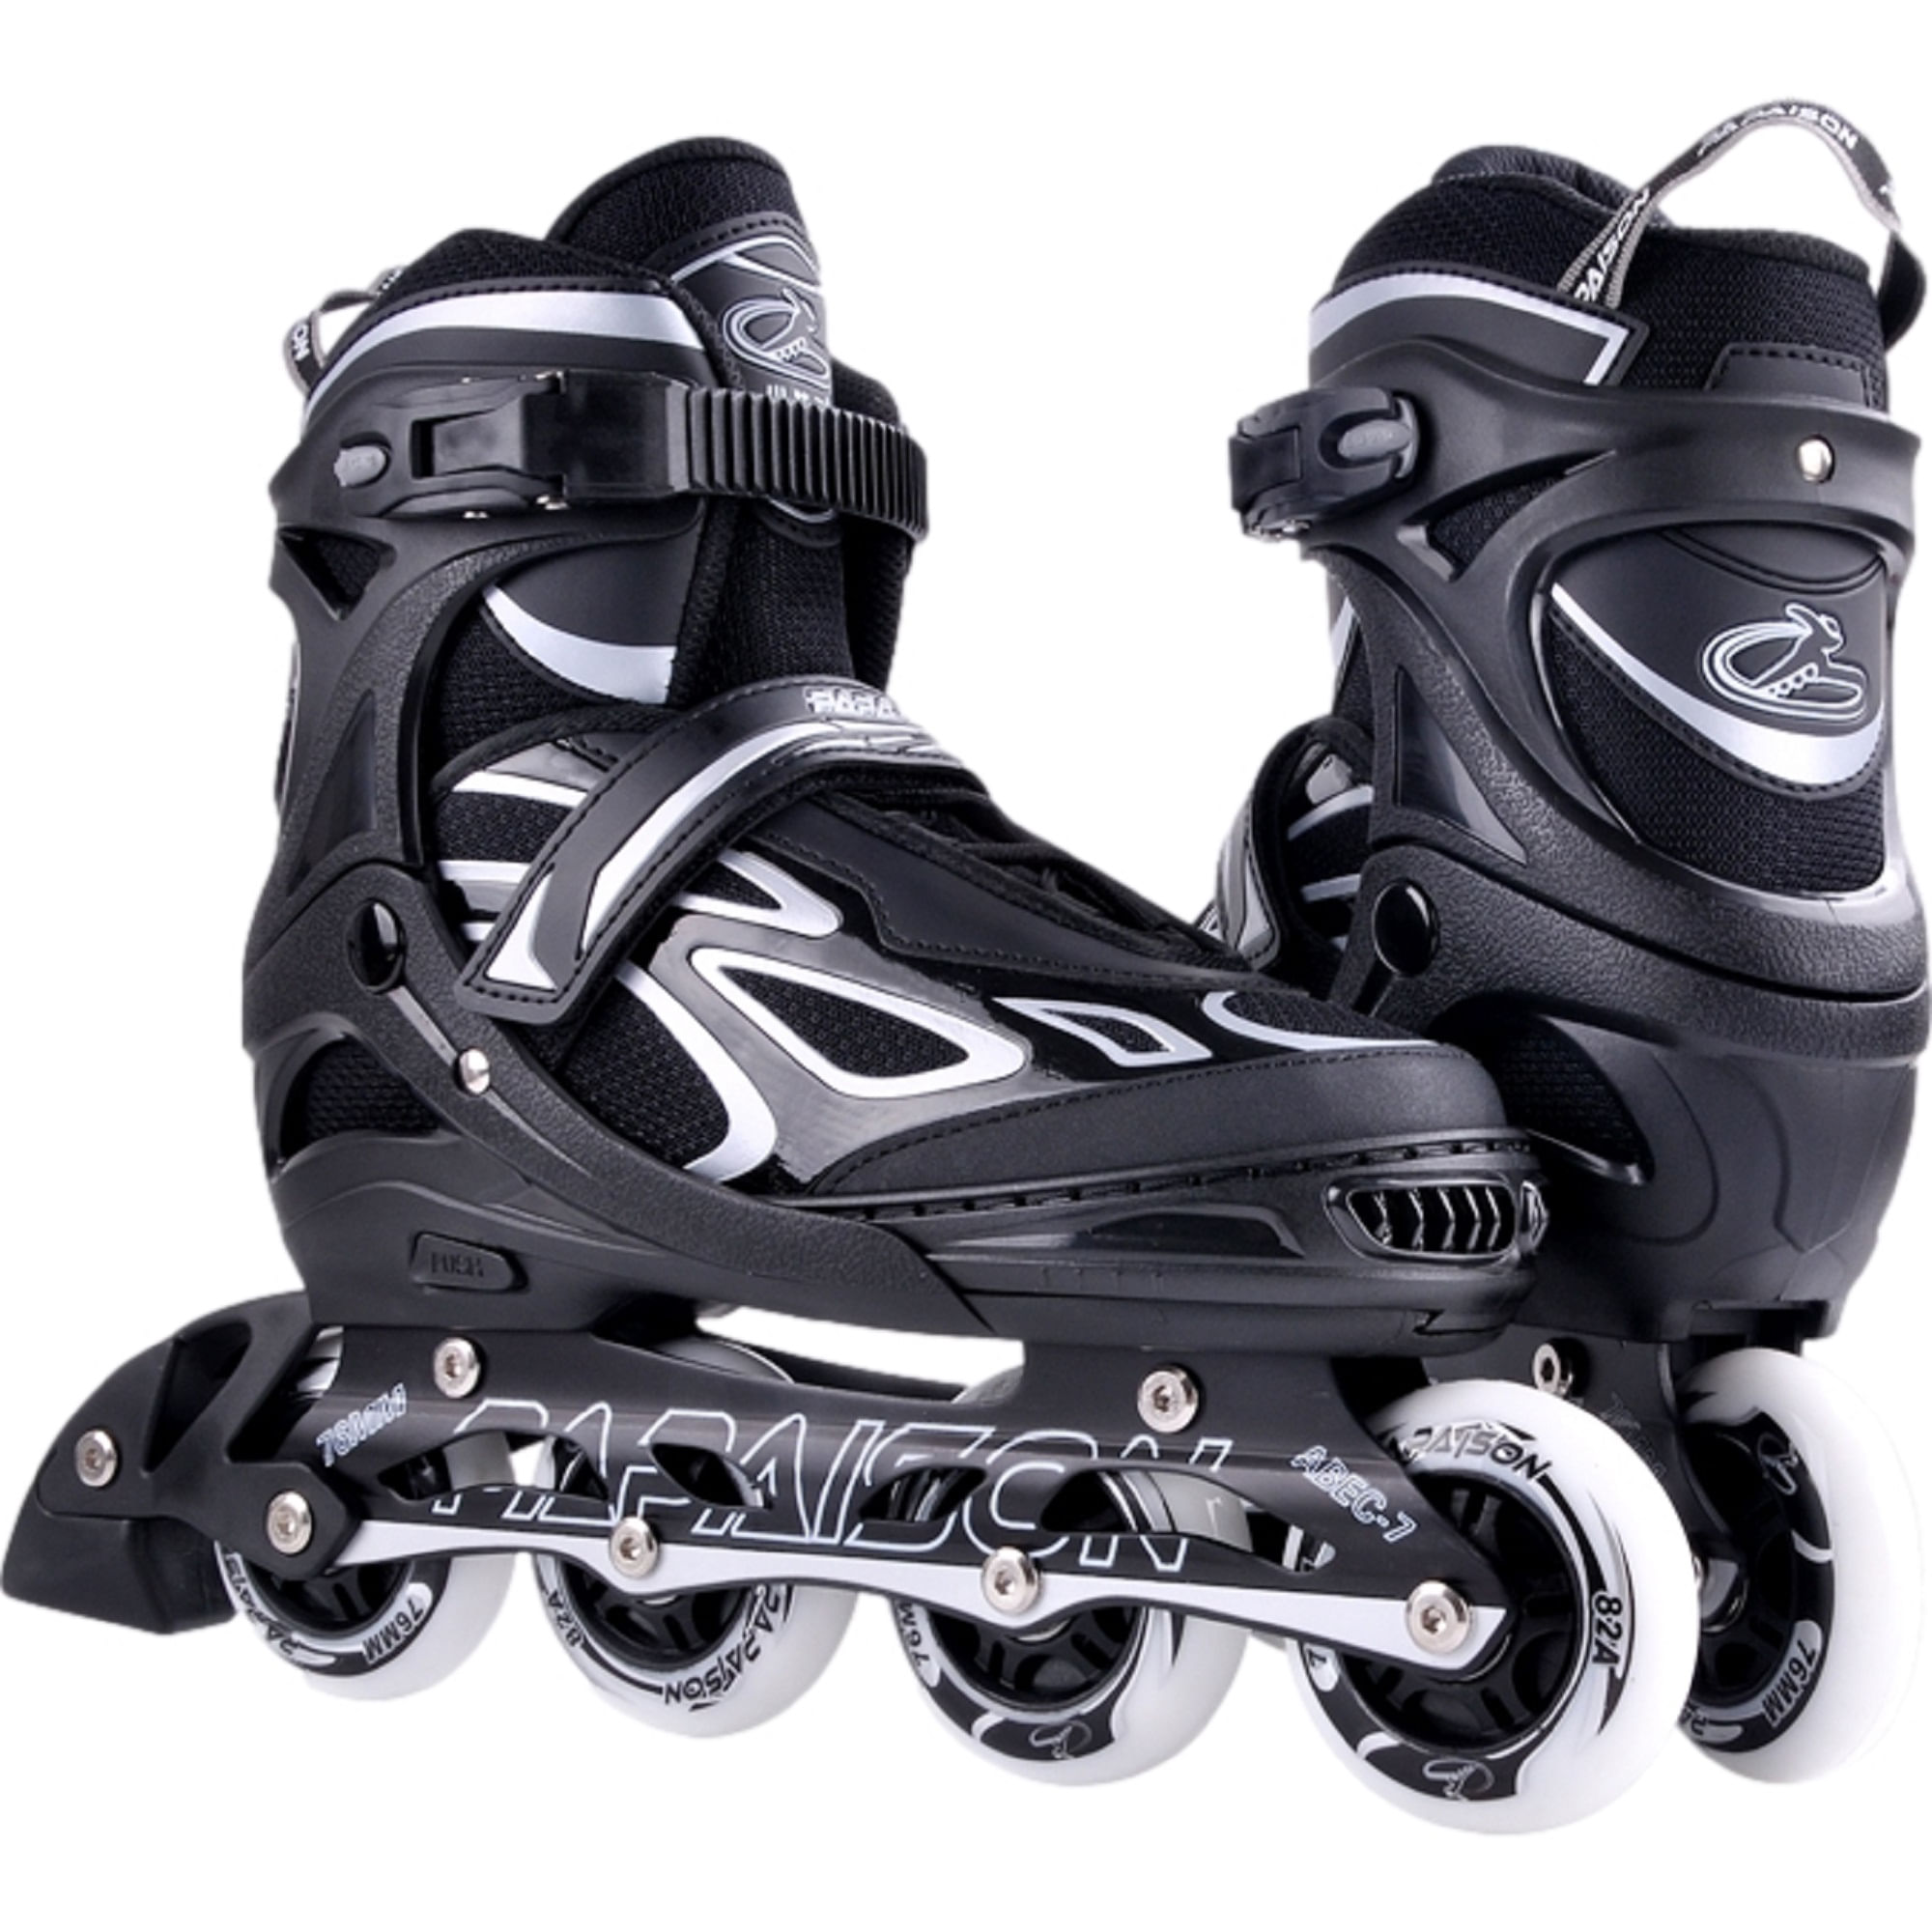 Patines Lineales Tallas 40-42 Papaison FIRE08 - Negro